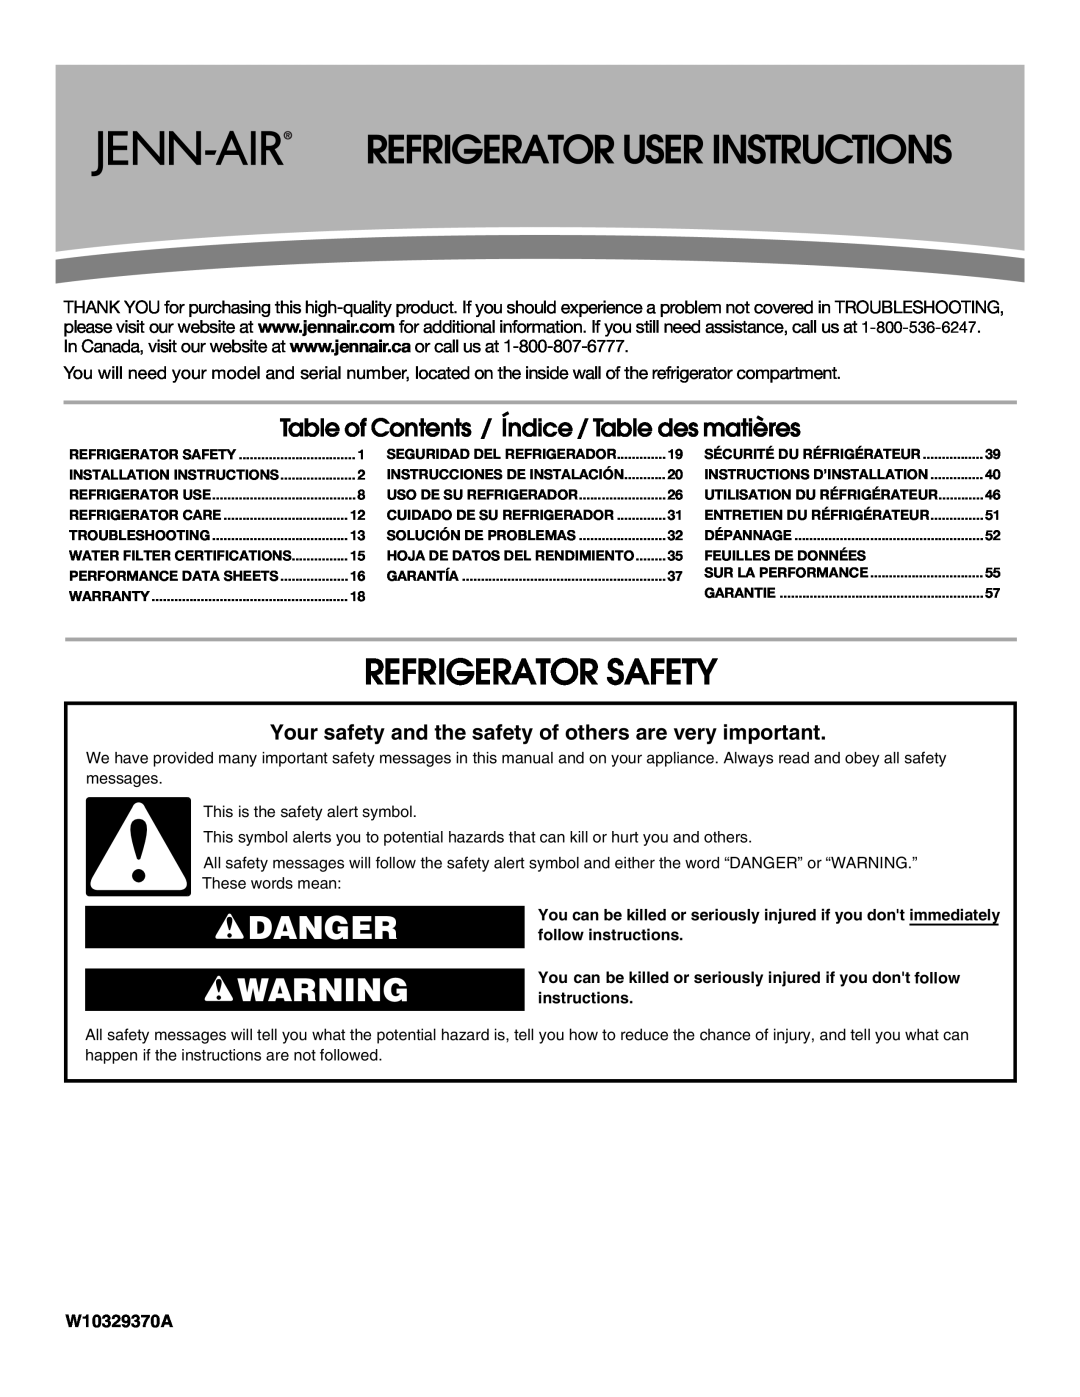 Jenn-Air W10329370A installation instructions Refrigerator Safety, Danger, Table of Contents / Índice / Table des matières 